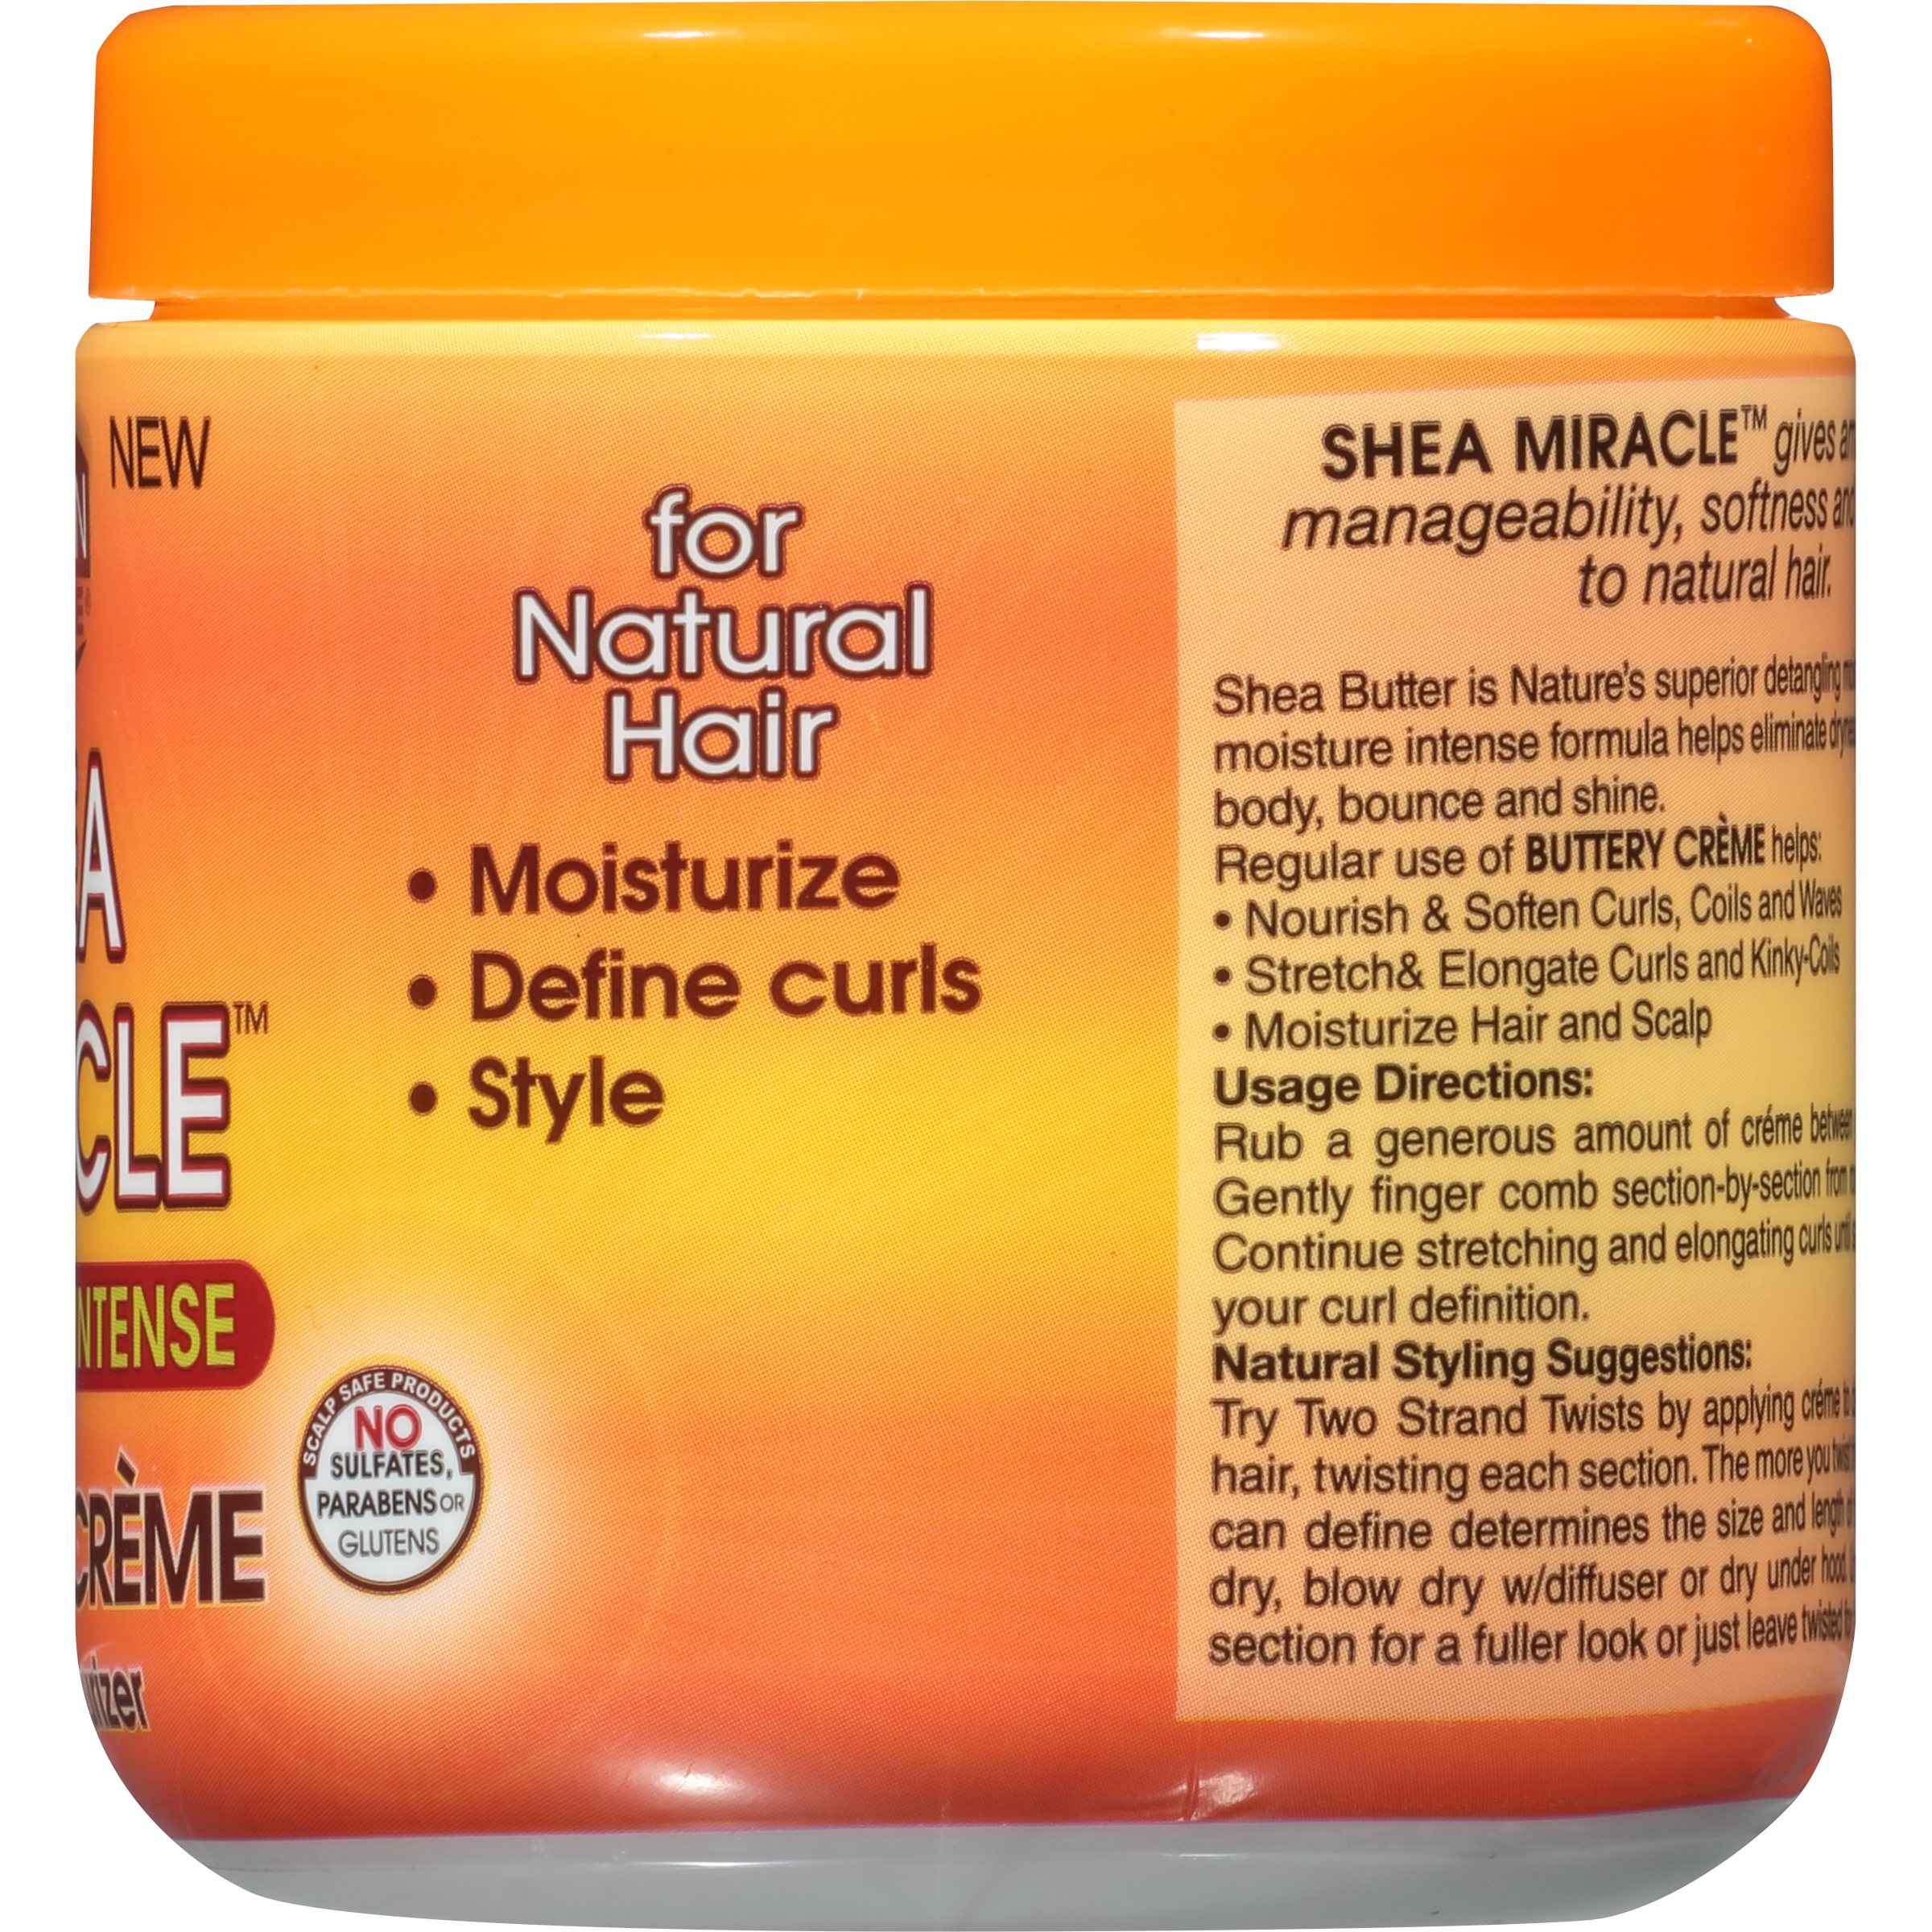 African Pride Shea Miracle Moisture Intense Buttery Leave In Cream Hair Moisturizer for Wavy, Curly, Coily Hair with Shea Butter, 6 oz. - image 4 of 6